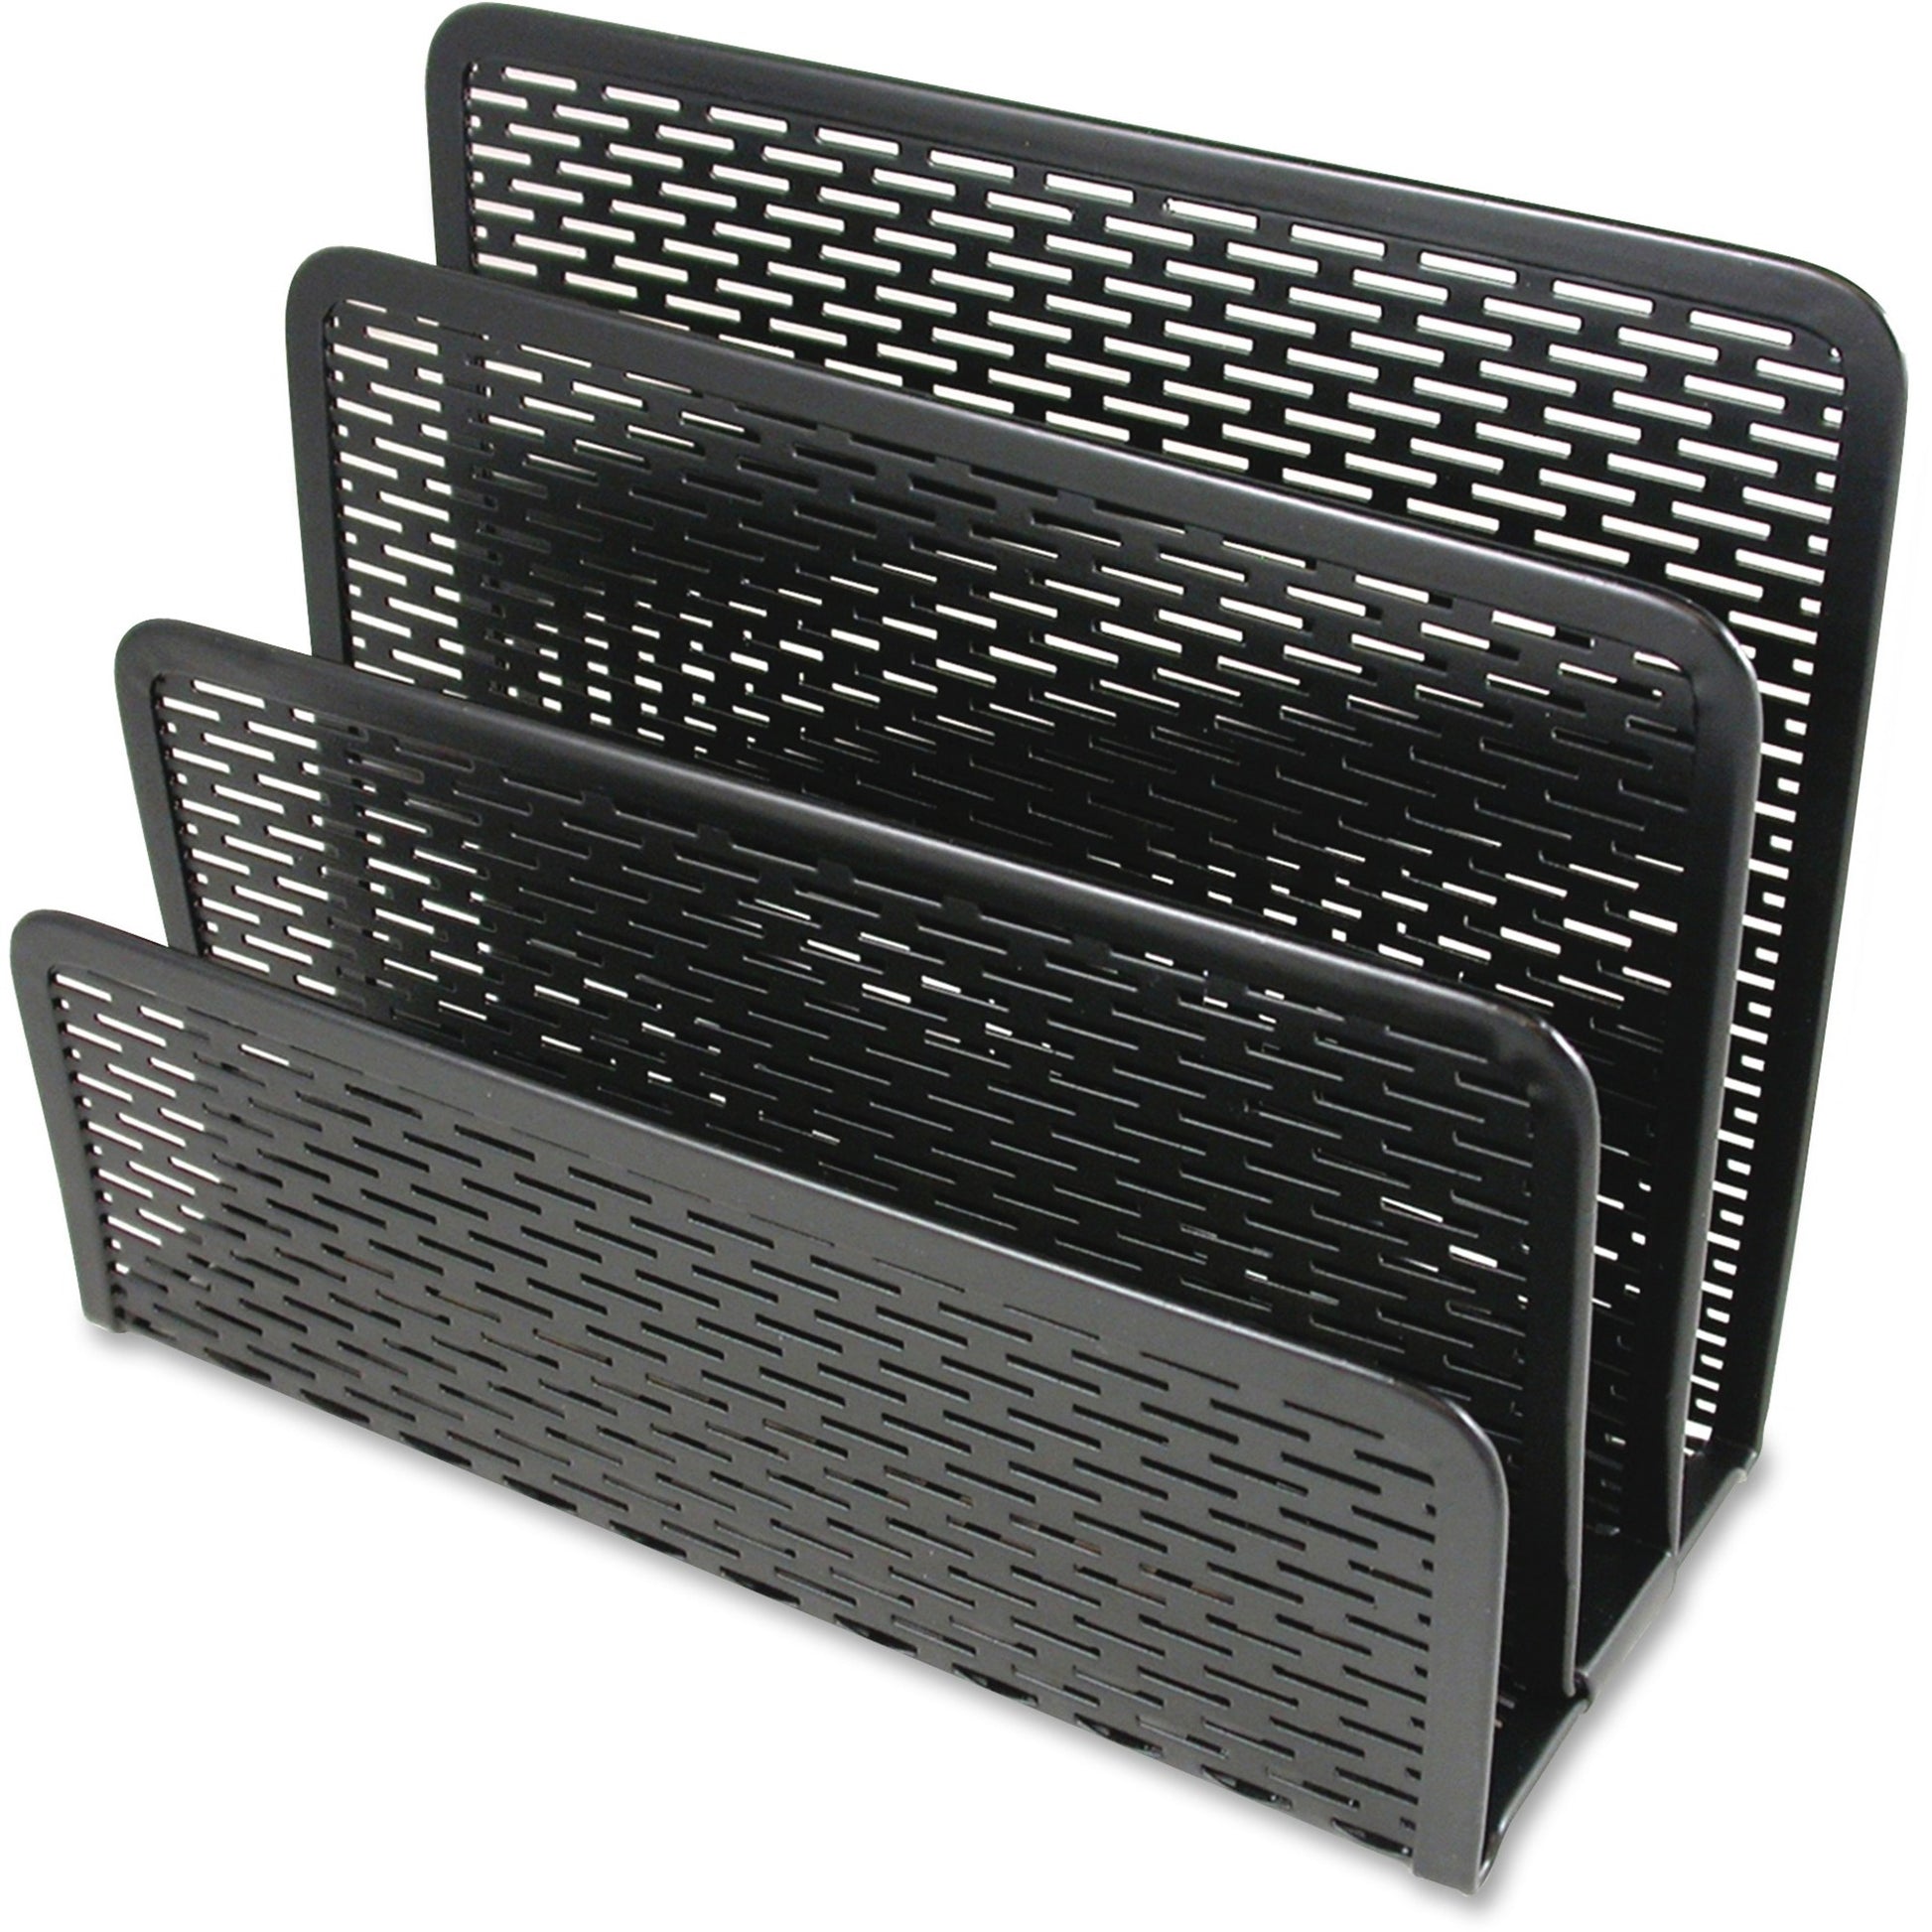 Artistic 3-compartment Punched Metal Letter Sorter